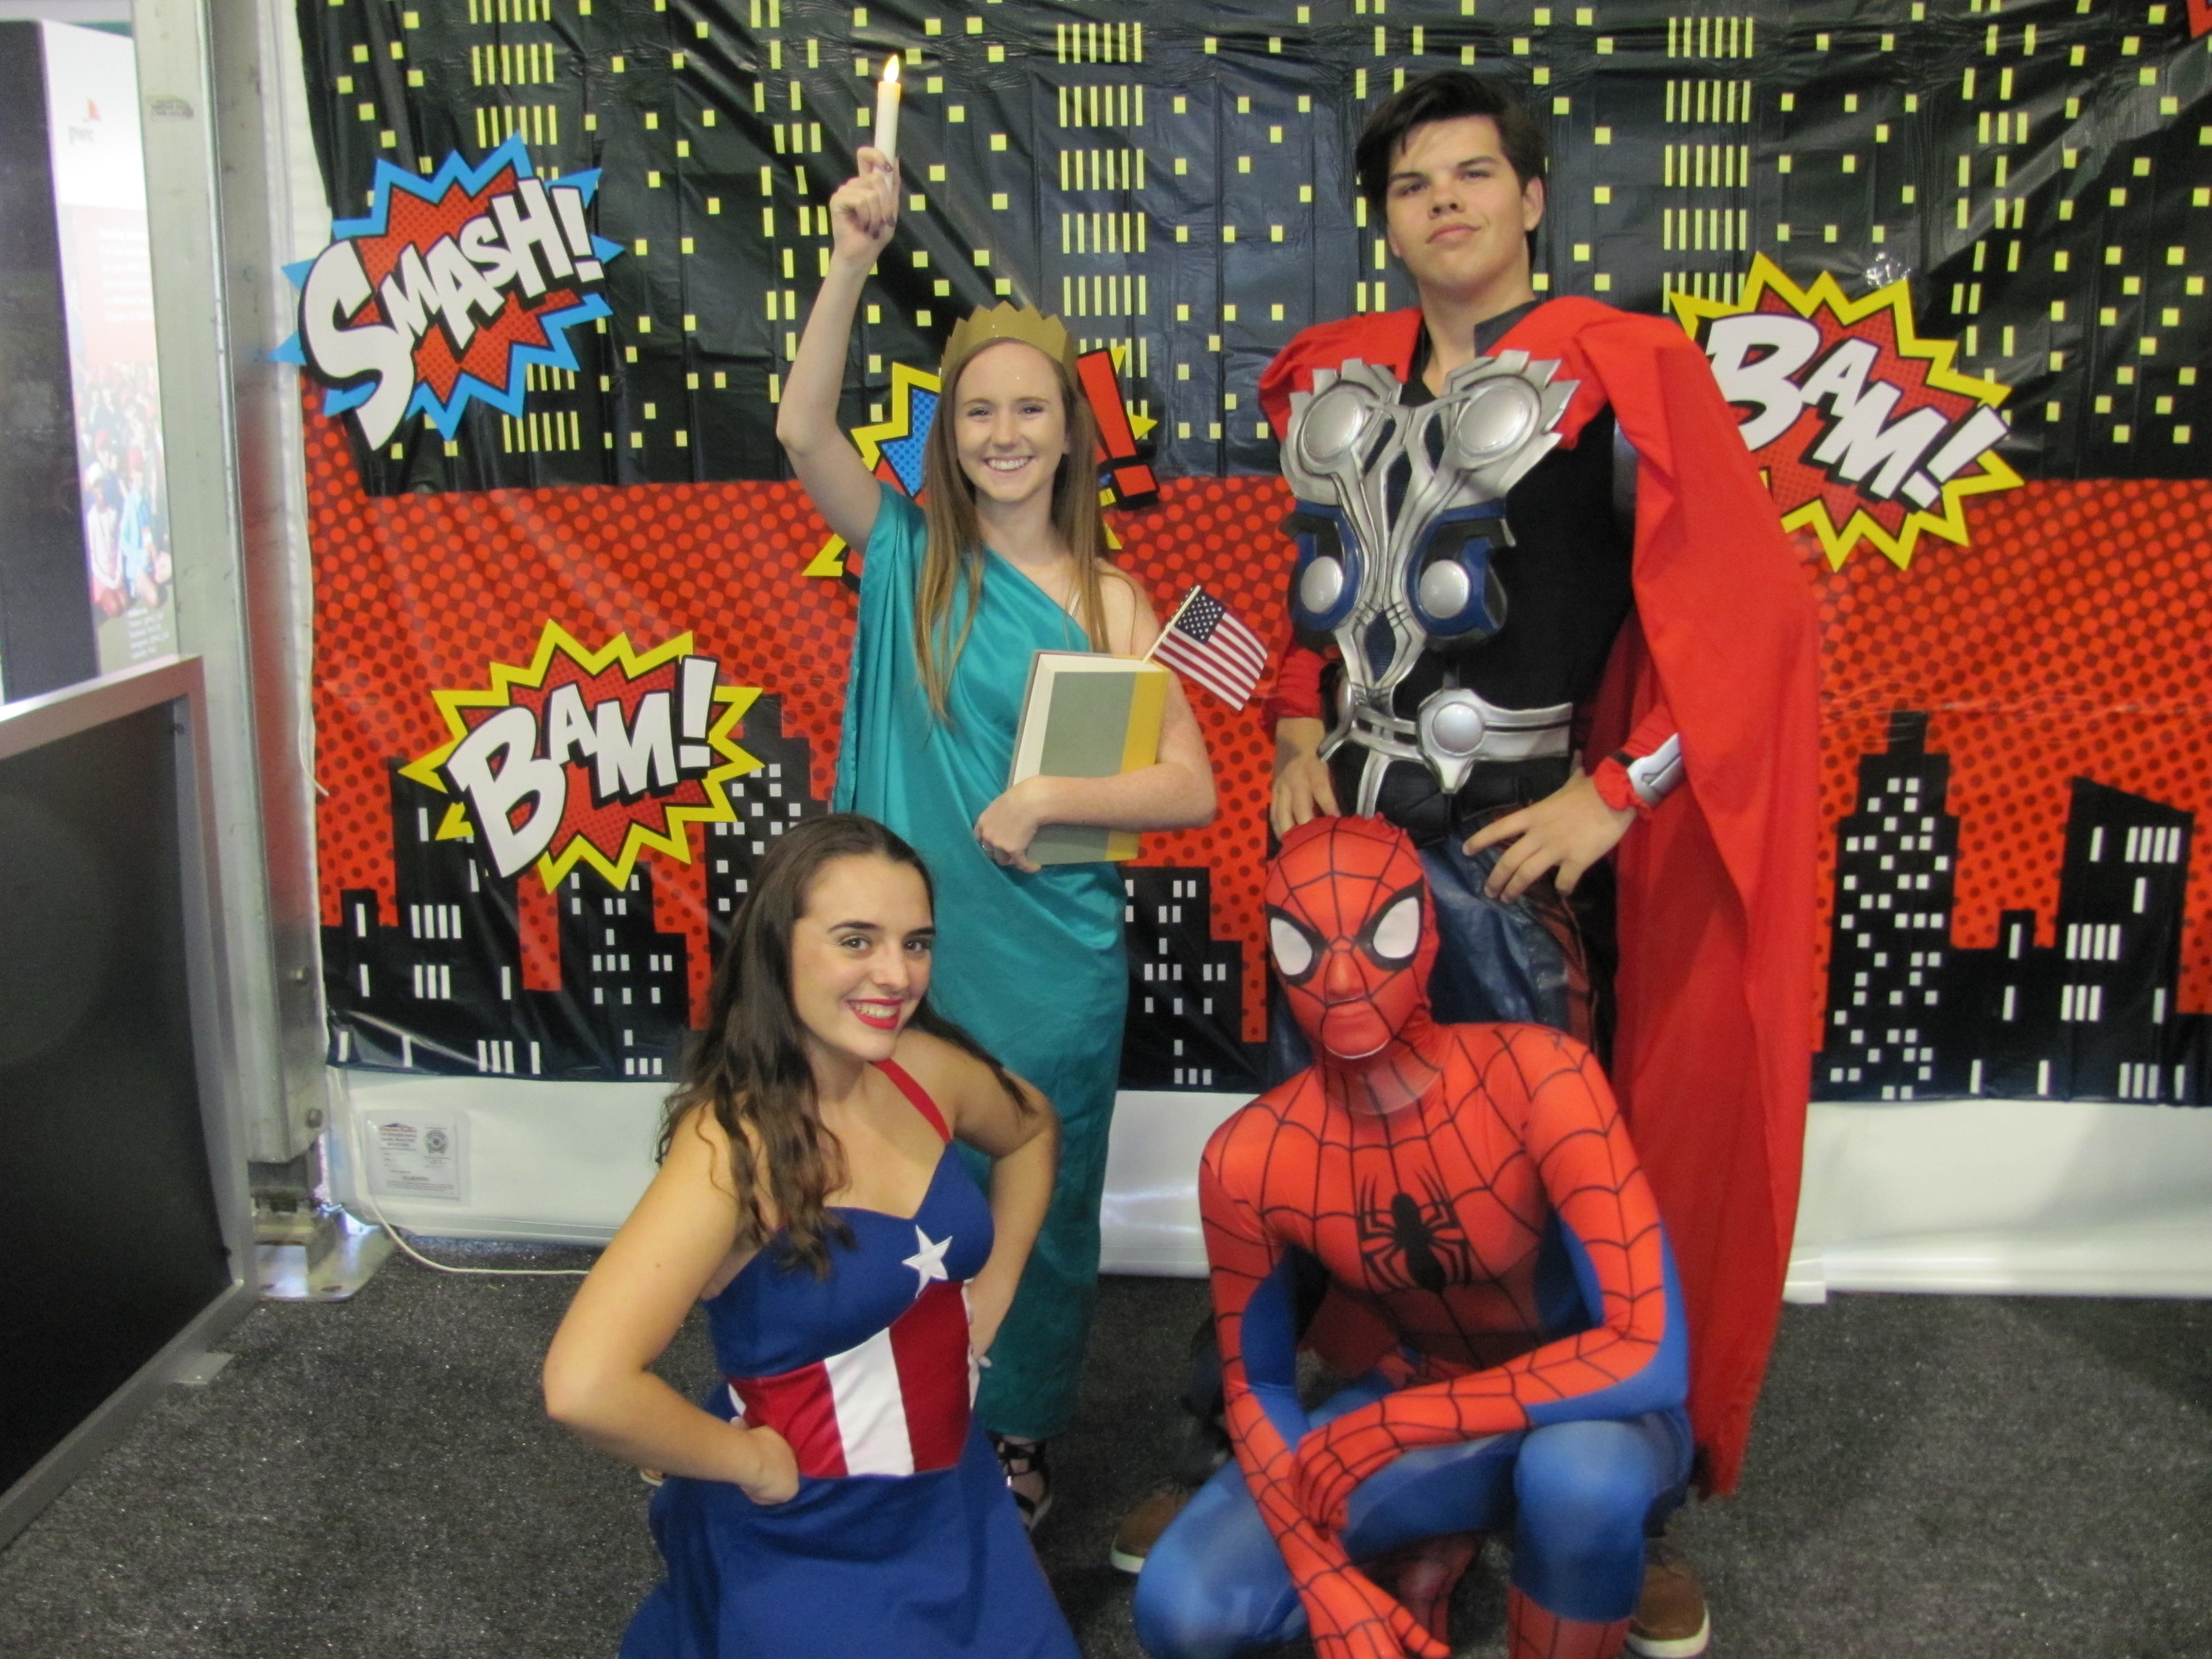 Ponte Vedra High School drama students Addie Spencer, Maria Gaynor, Nick Dondero and Ty Lewin act as superheroes at “These Kids Can Play.”